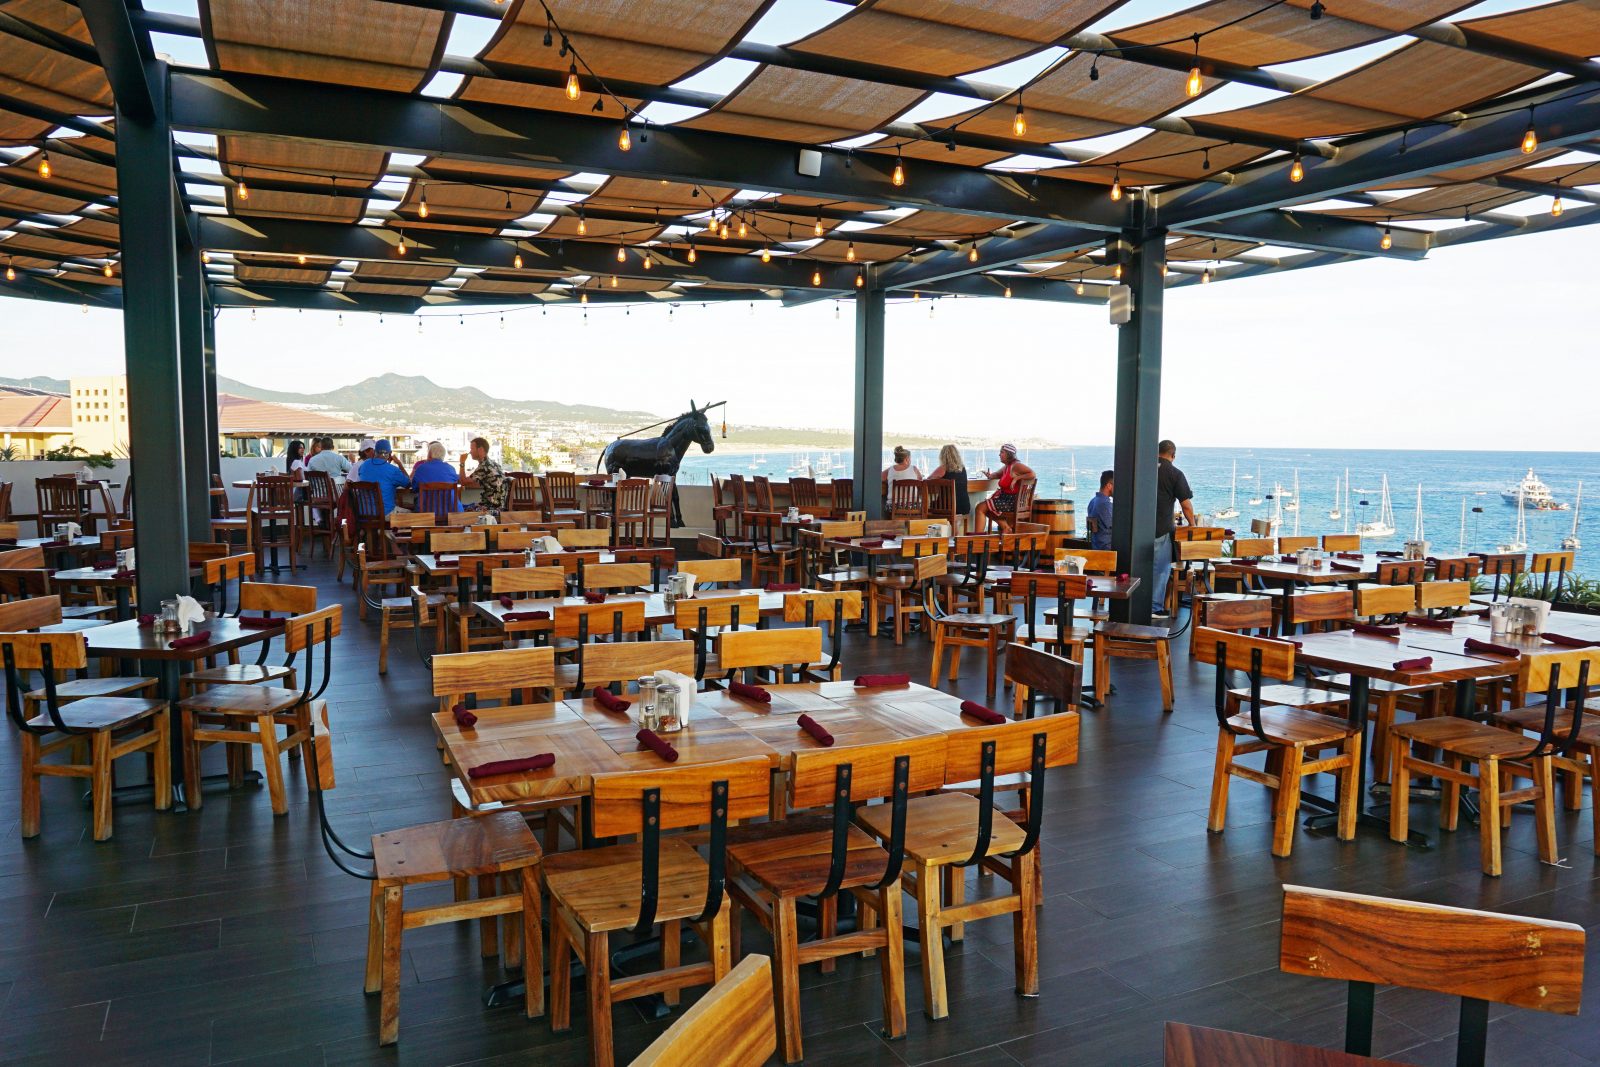 Baja Brewery on Medano Beach is one of the top 15 restaurants in Cabo